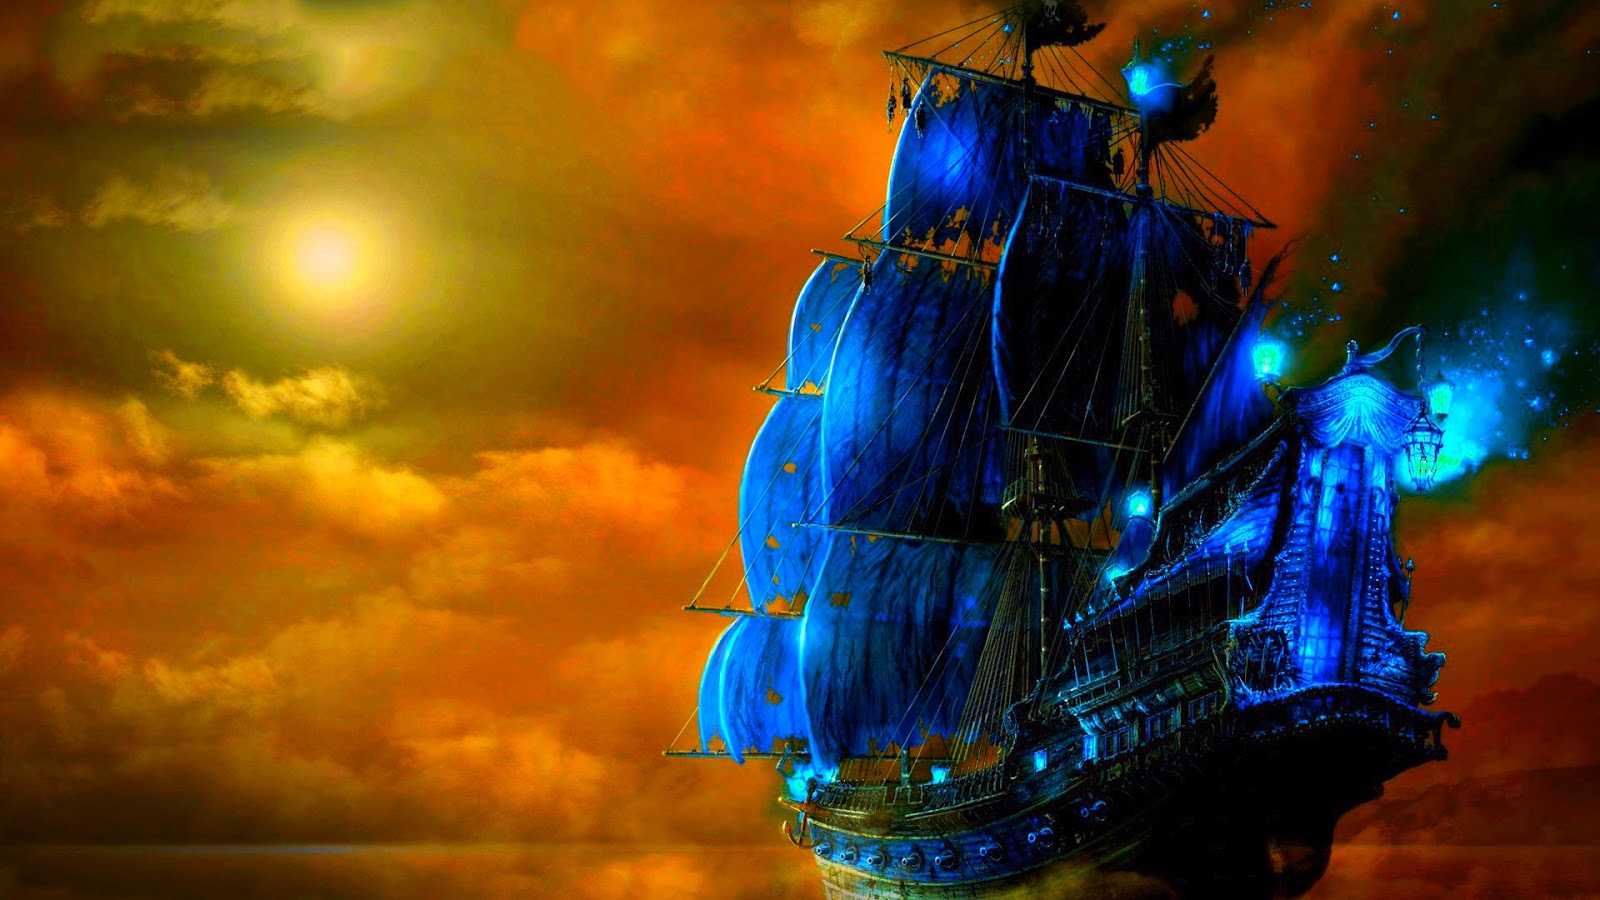 Pirate Ship Wallpaper submited images